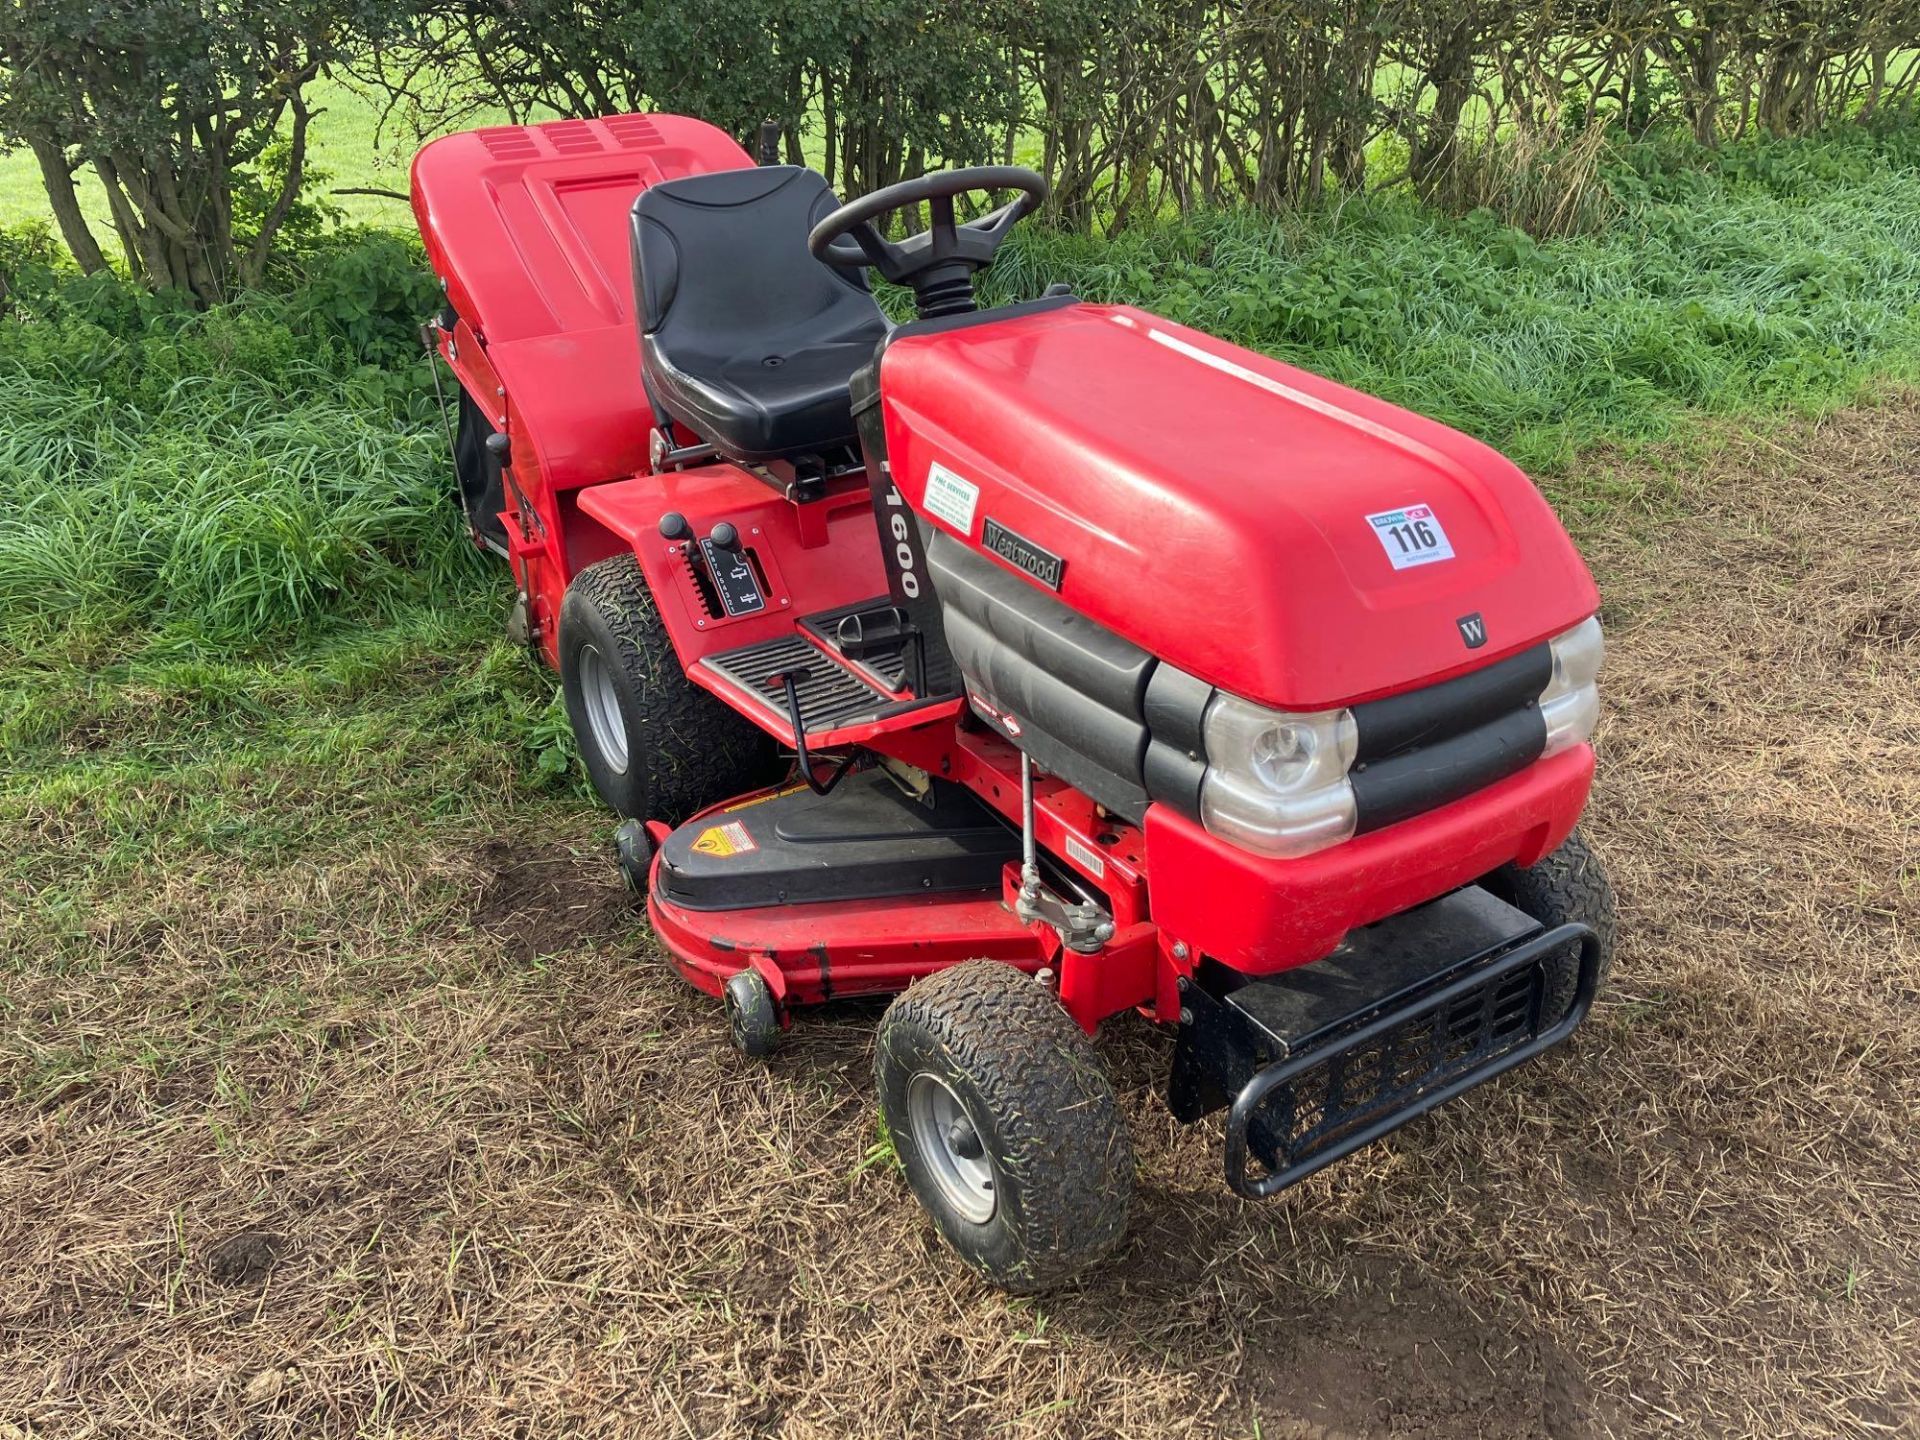 Westwood T1600 ride on mower with collector